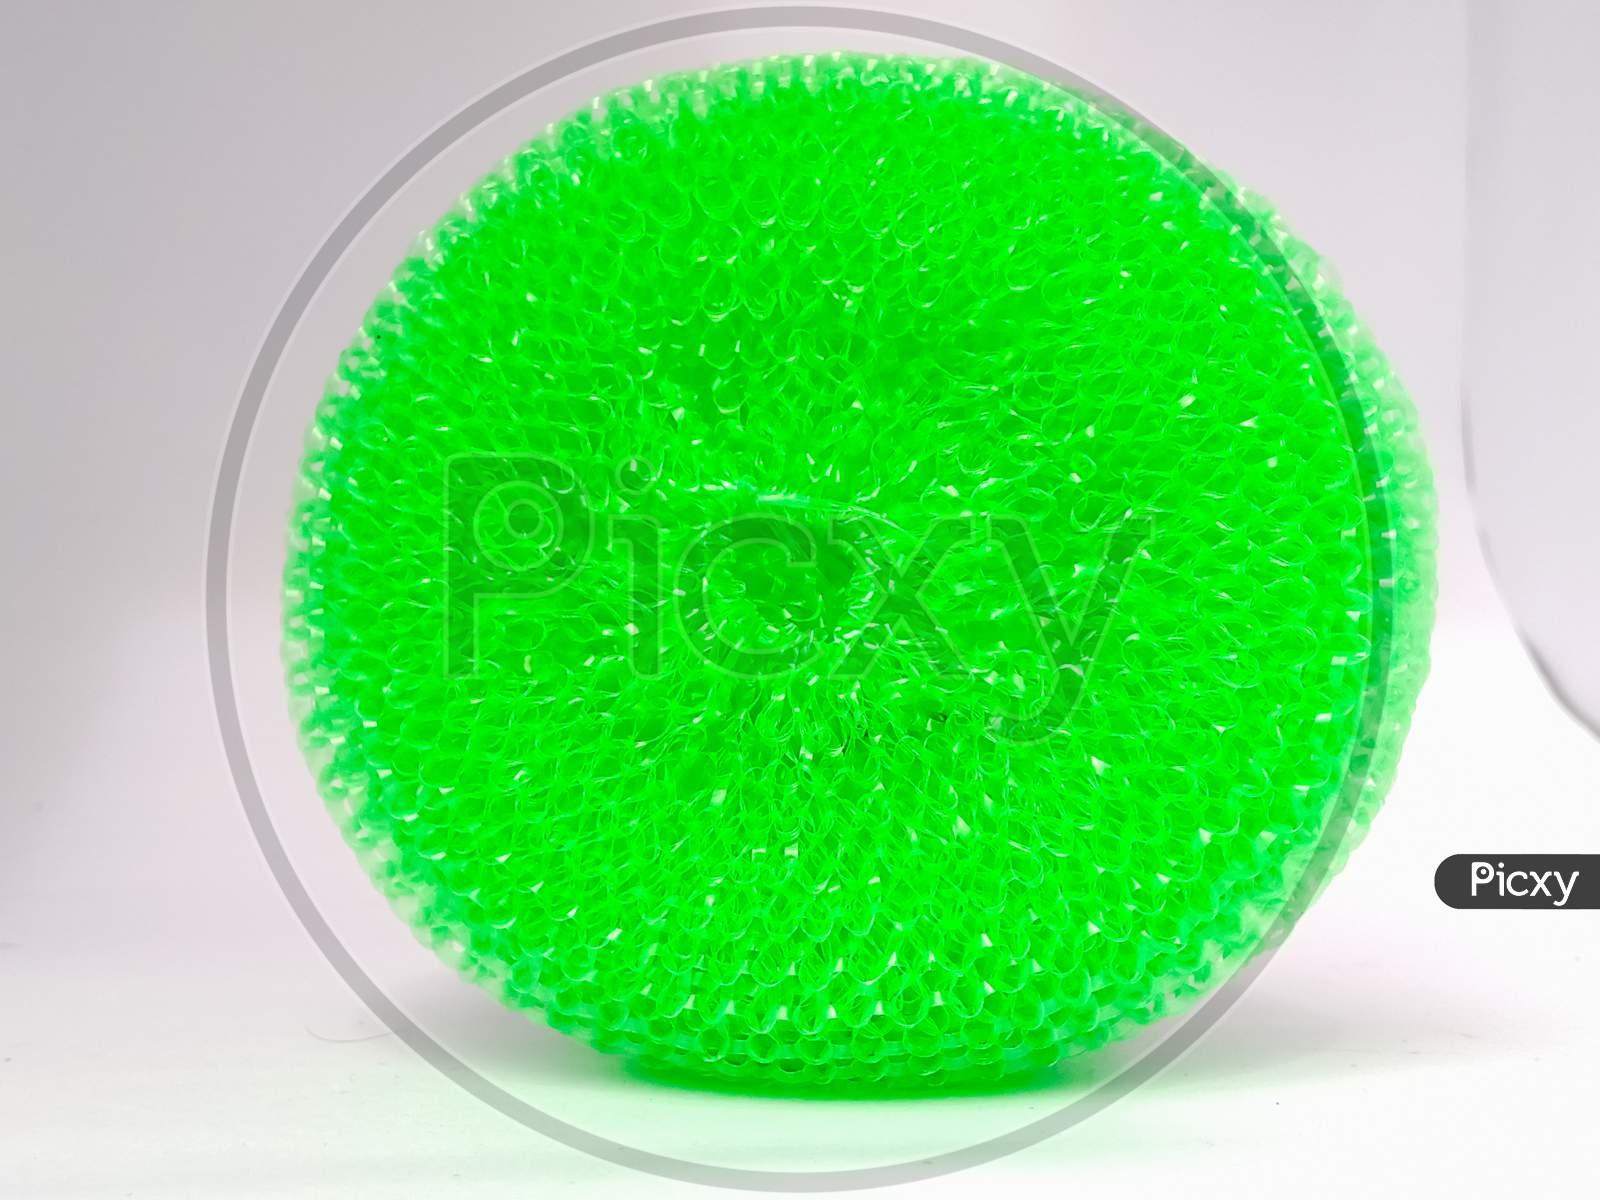 A Closeup Shot Of Green Plastic Scrubber Placed Isolated Vertically On A White Background.